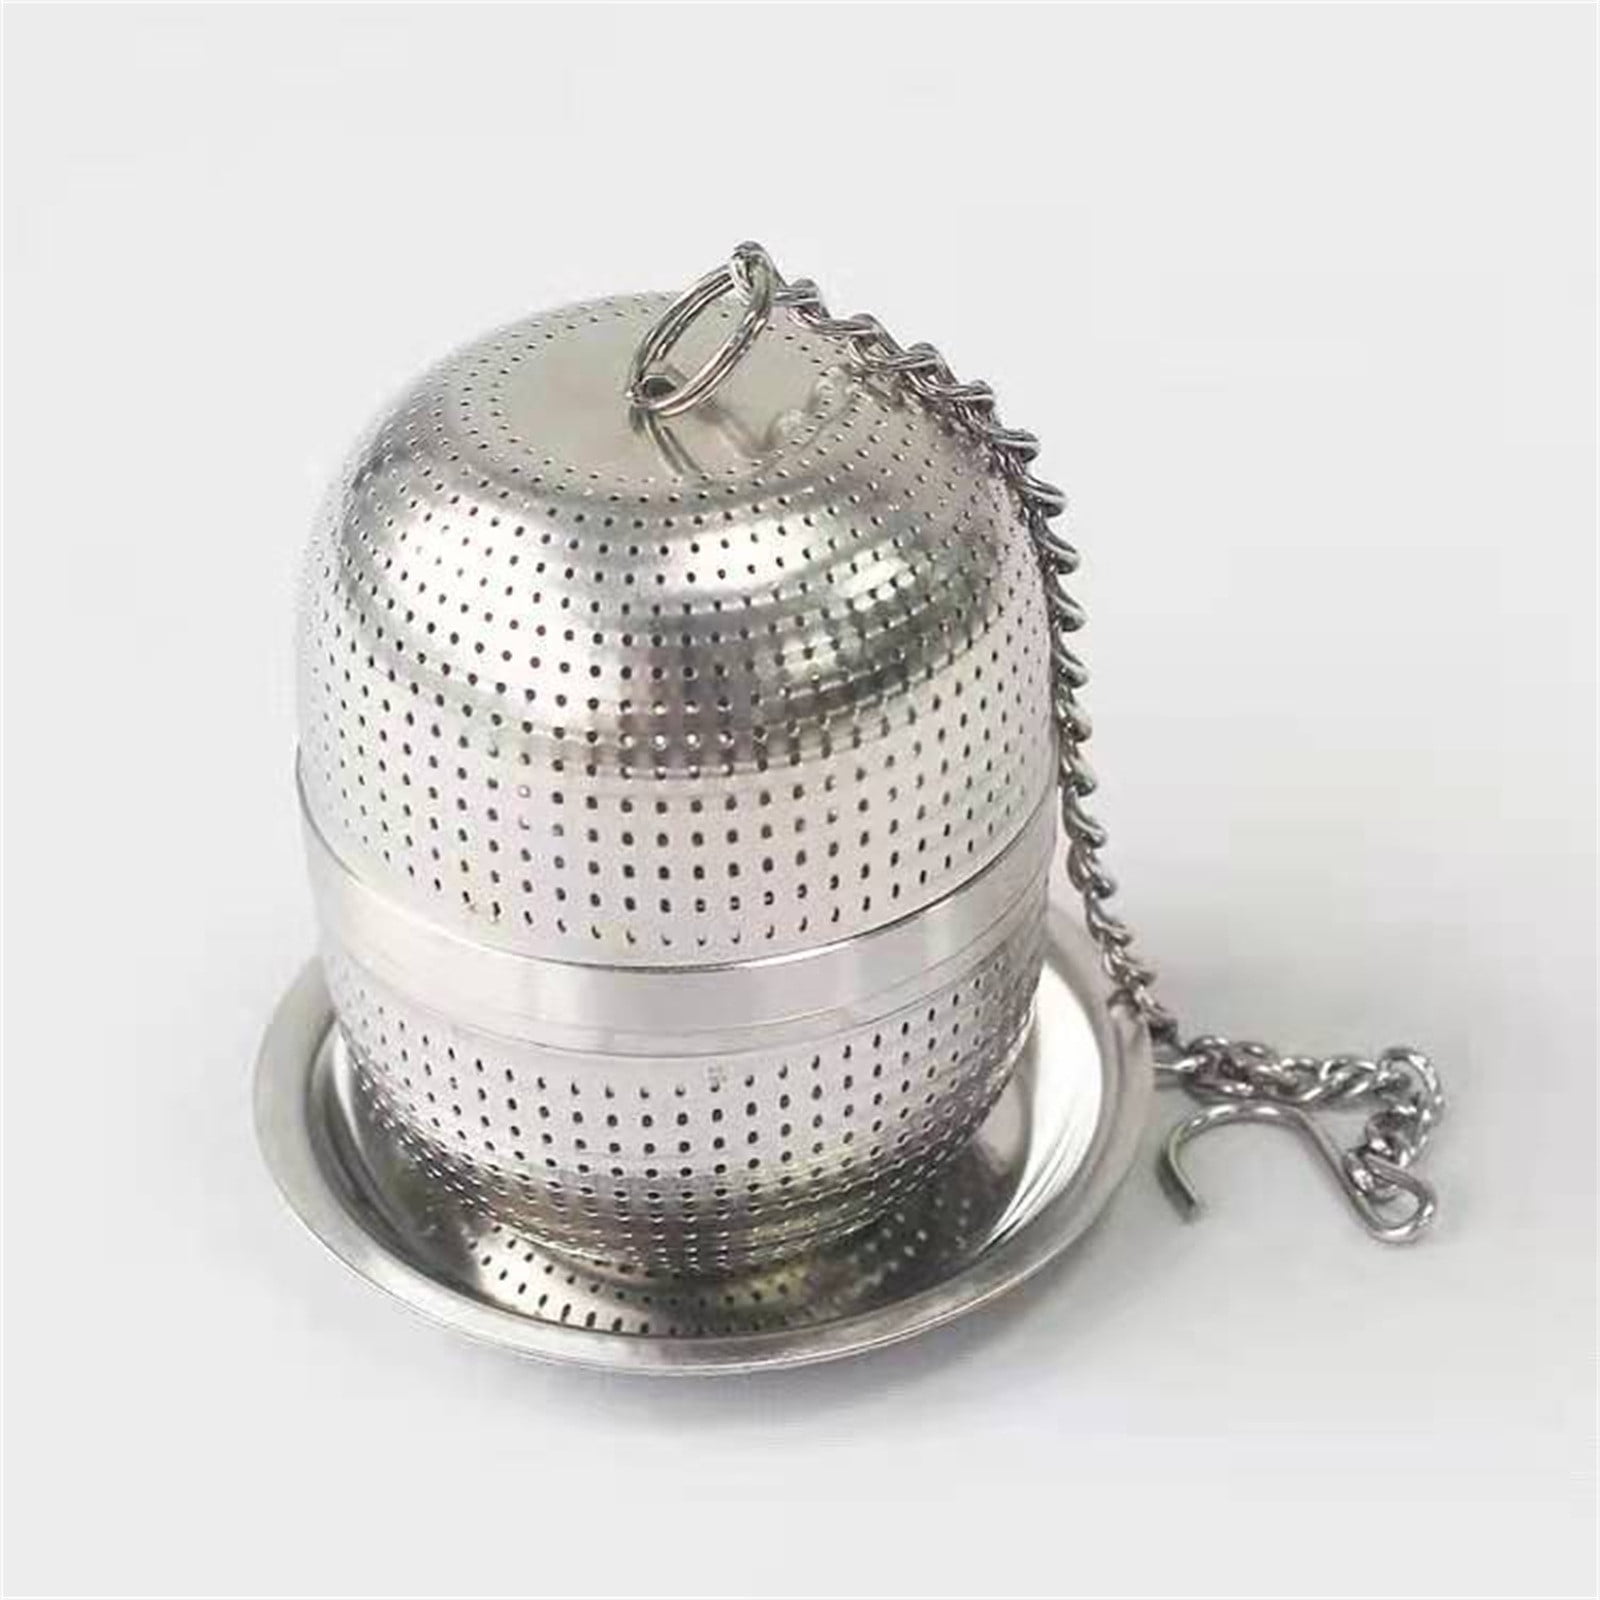 NEW DECORATIVE STAINLESS STEEL TEA BALL LEAVE STRAINER INFUSER STEEPING CHOOSE 1 